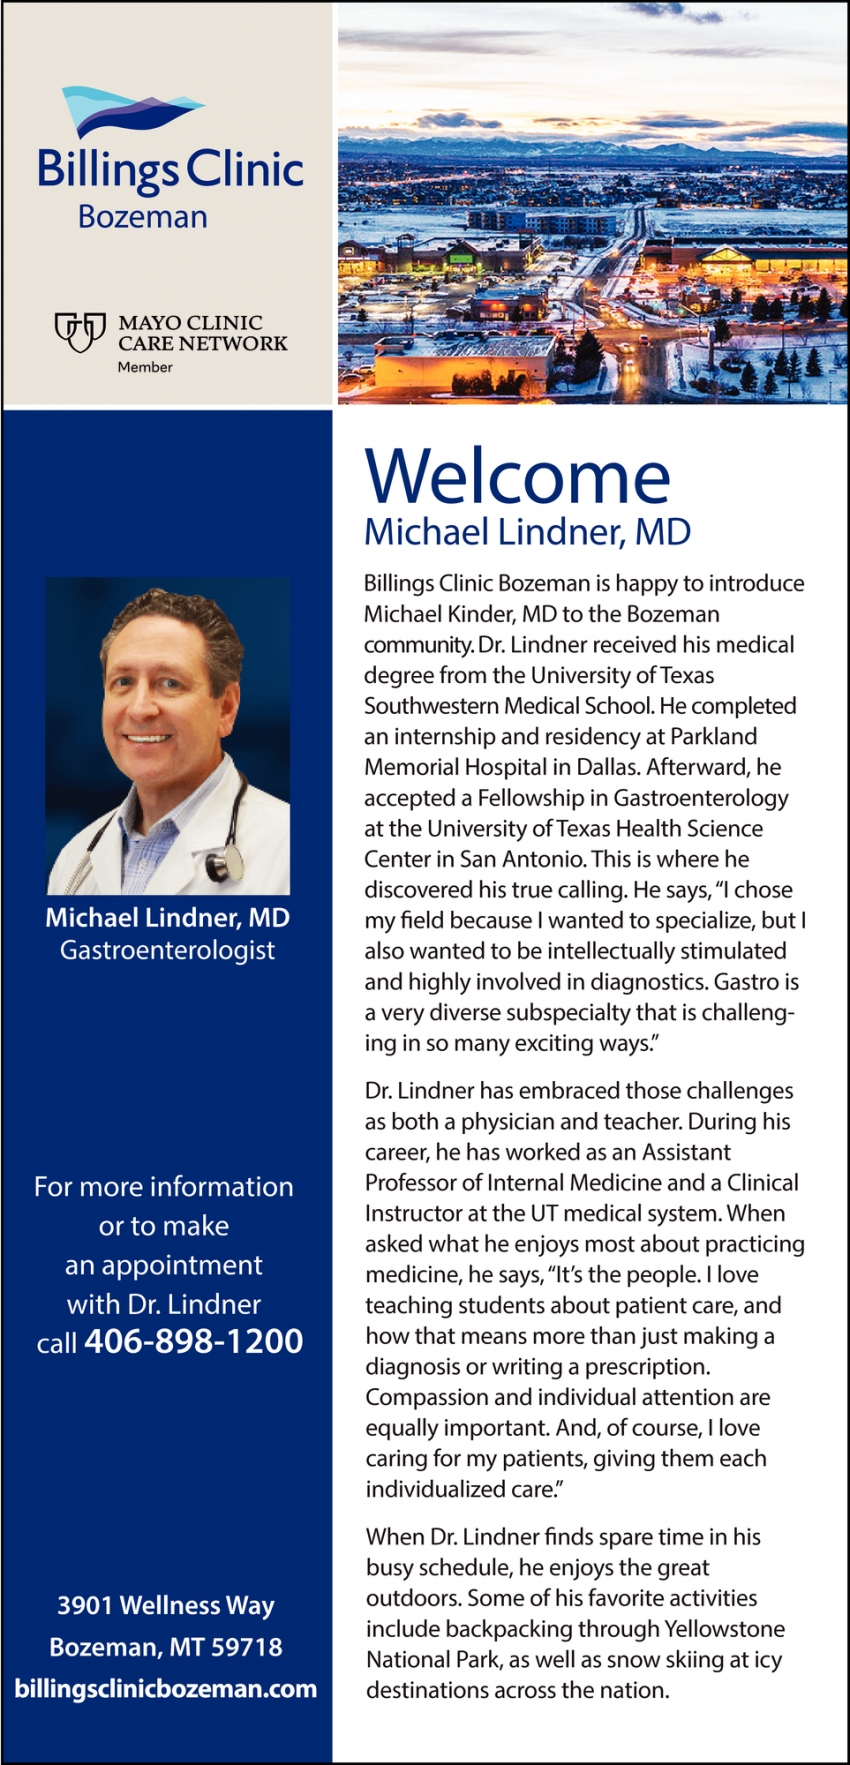 Welcome Michael Lindner, MD